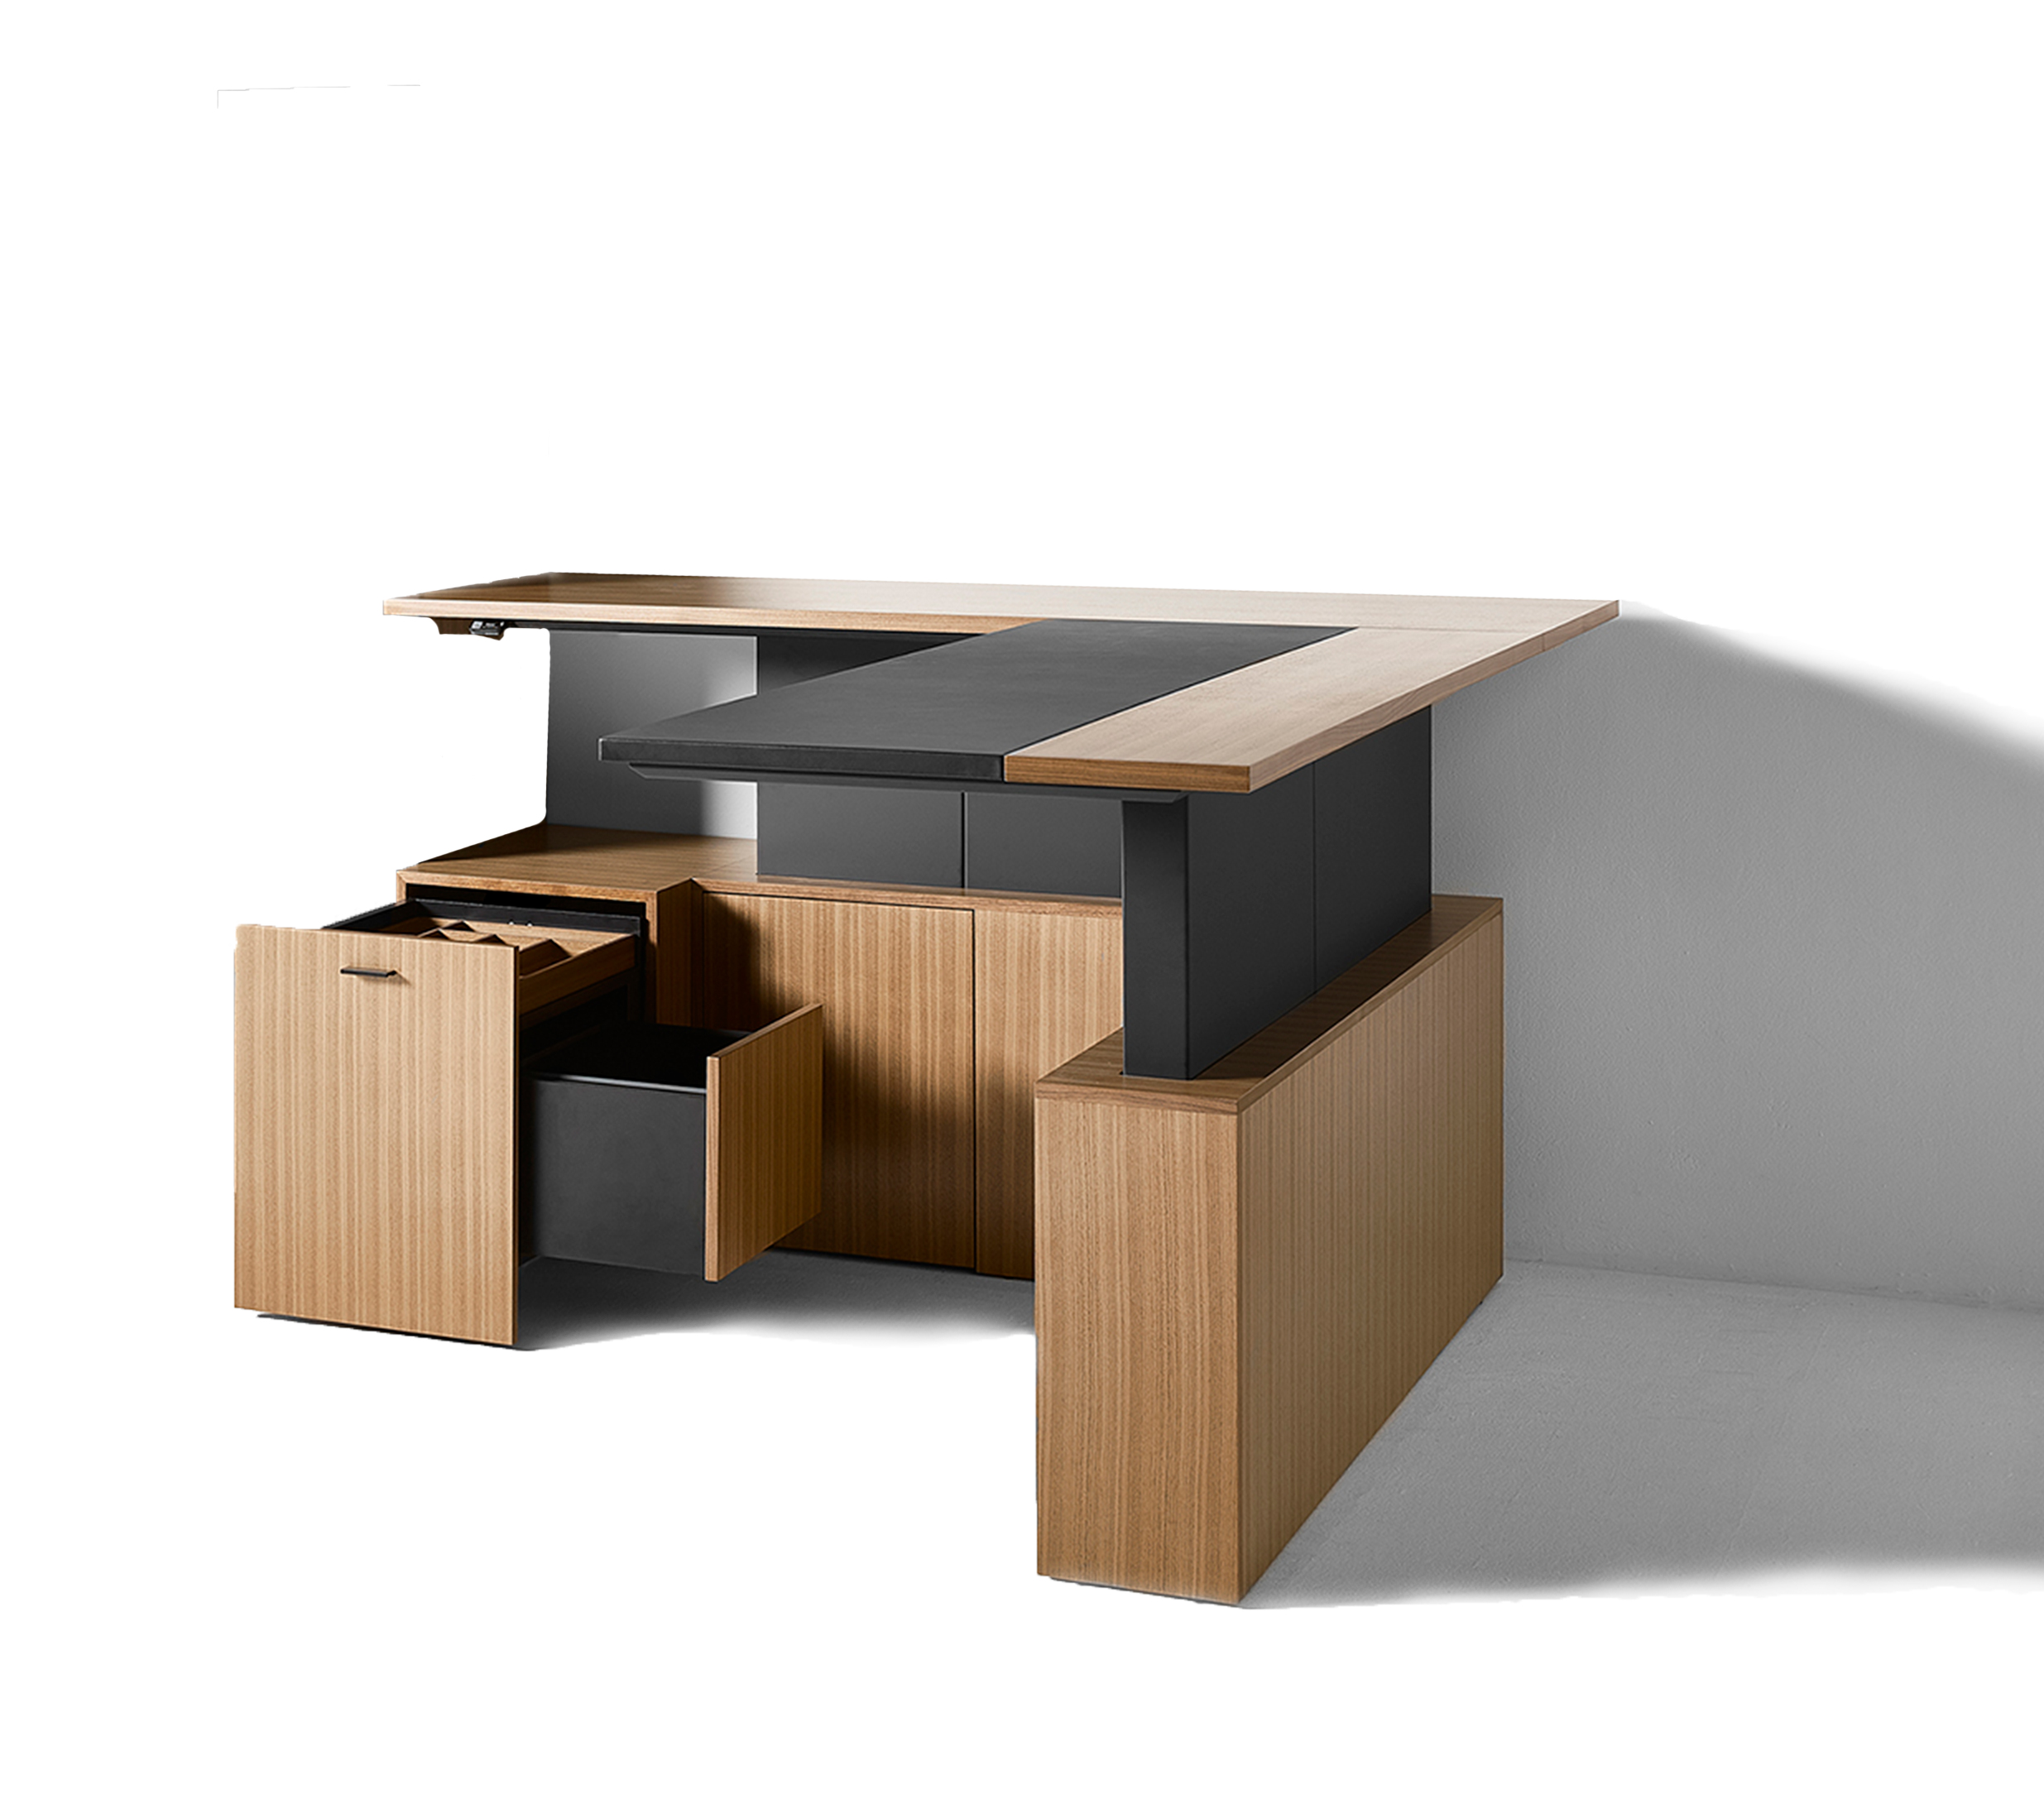 L Shaped Solo Sleek Desk is a modern executive level desk for high end office furniture or residential installs